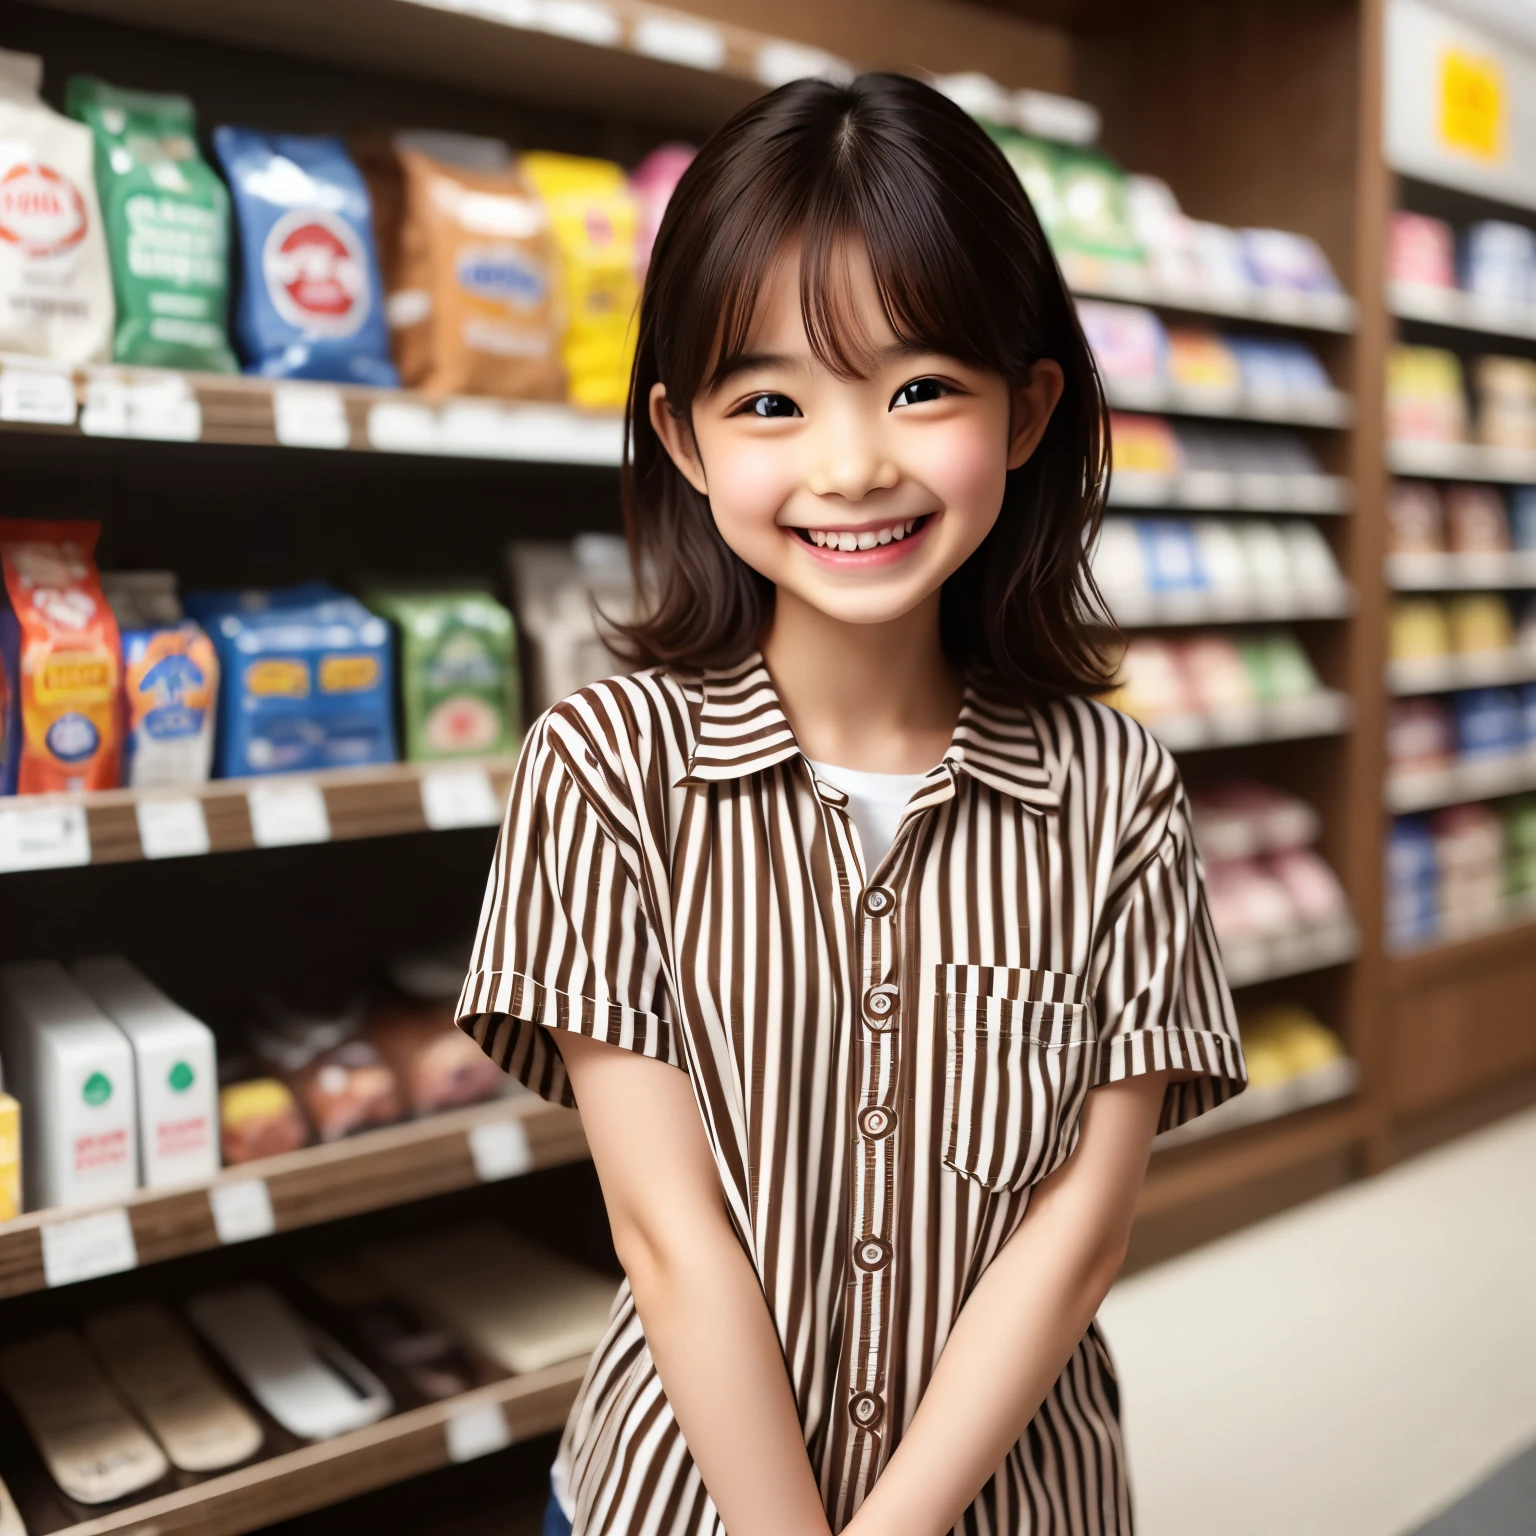 Fine face, cute face, brown eyes, (convenience store: 1.3), convenience store employee uniform, (vertical striped shirt: 1.3), short sleeves, ID card, smile, 16 years old